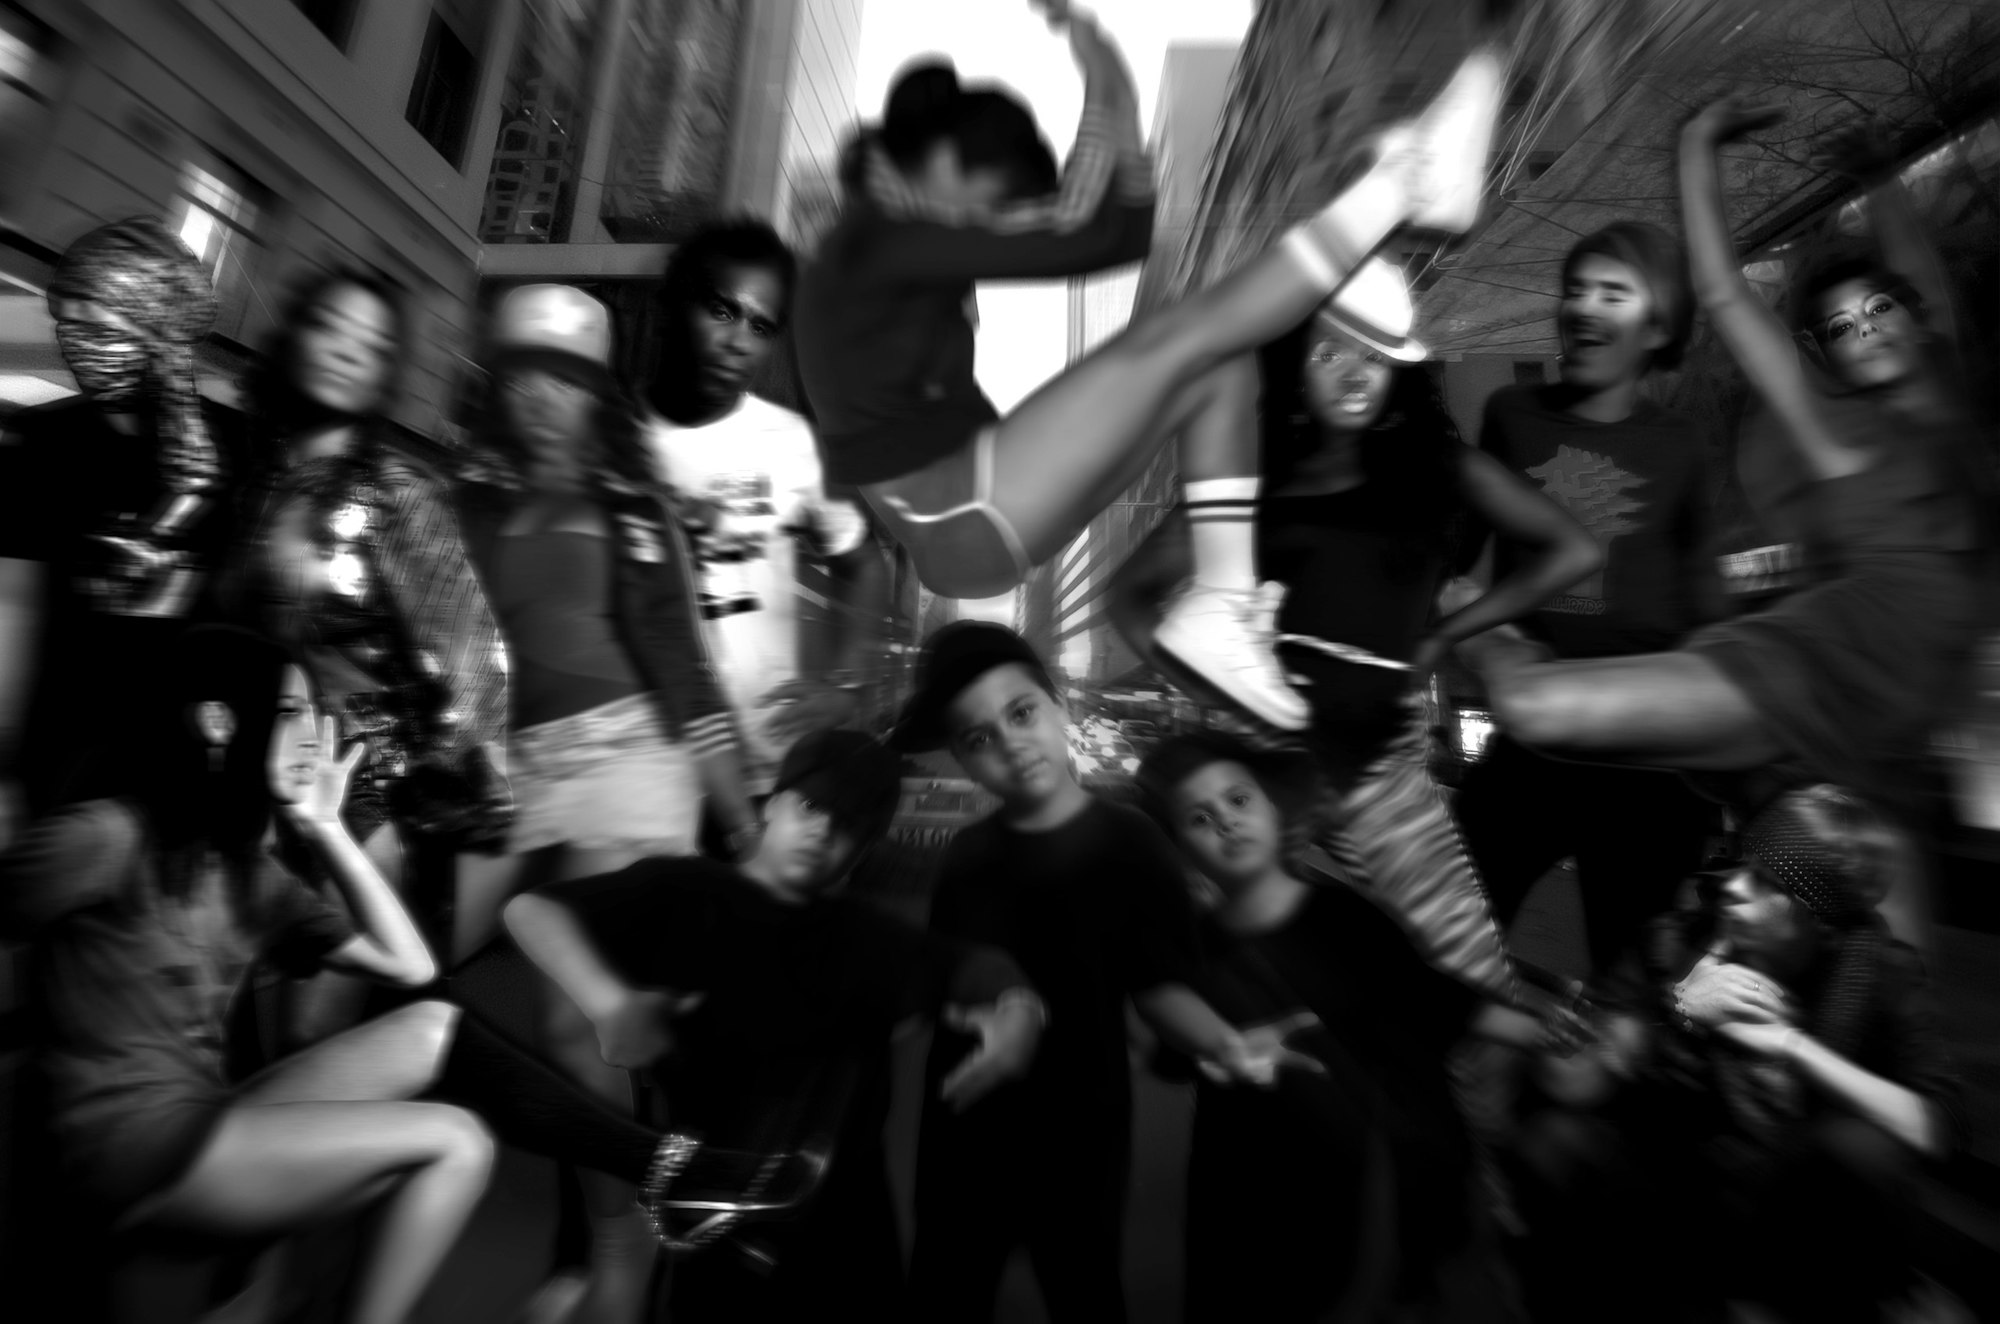 A black-and-white montage of people in various poses surrounded by high-rise buildings